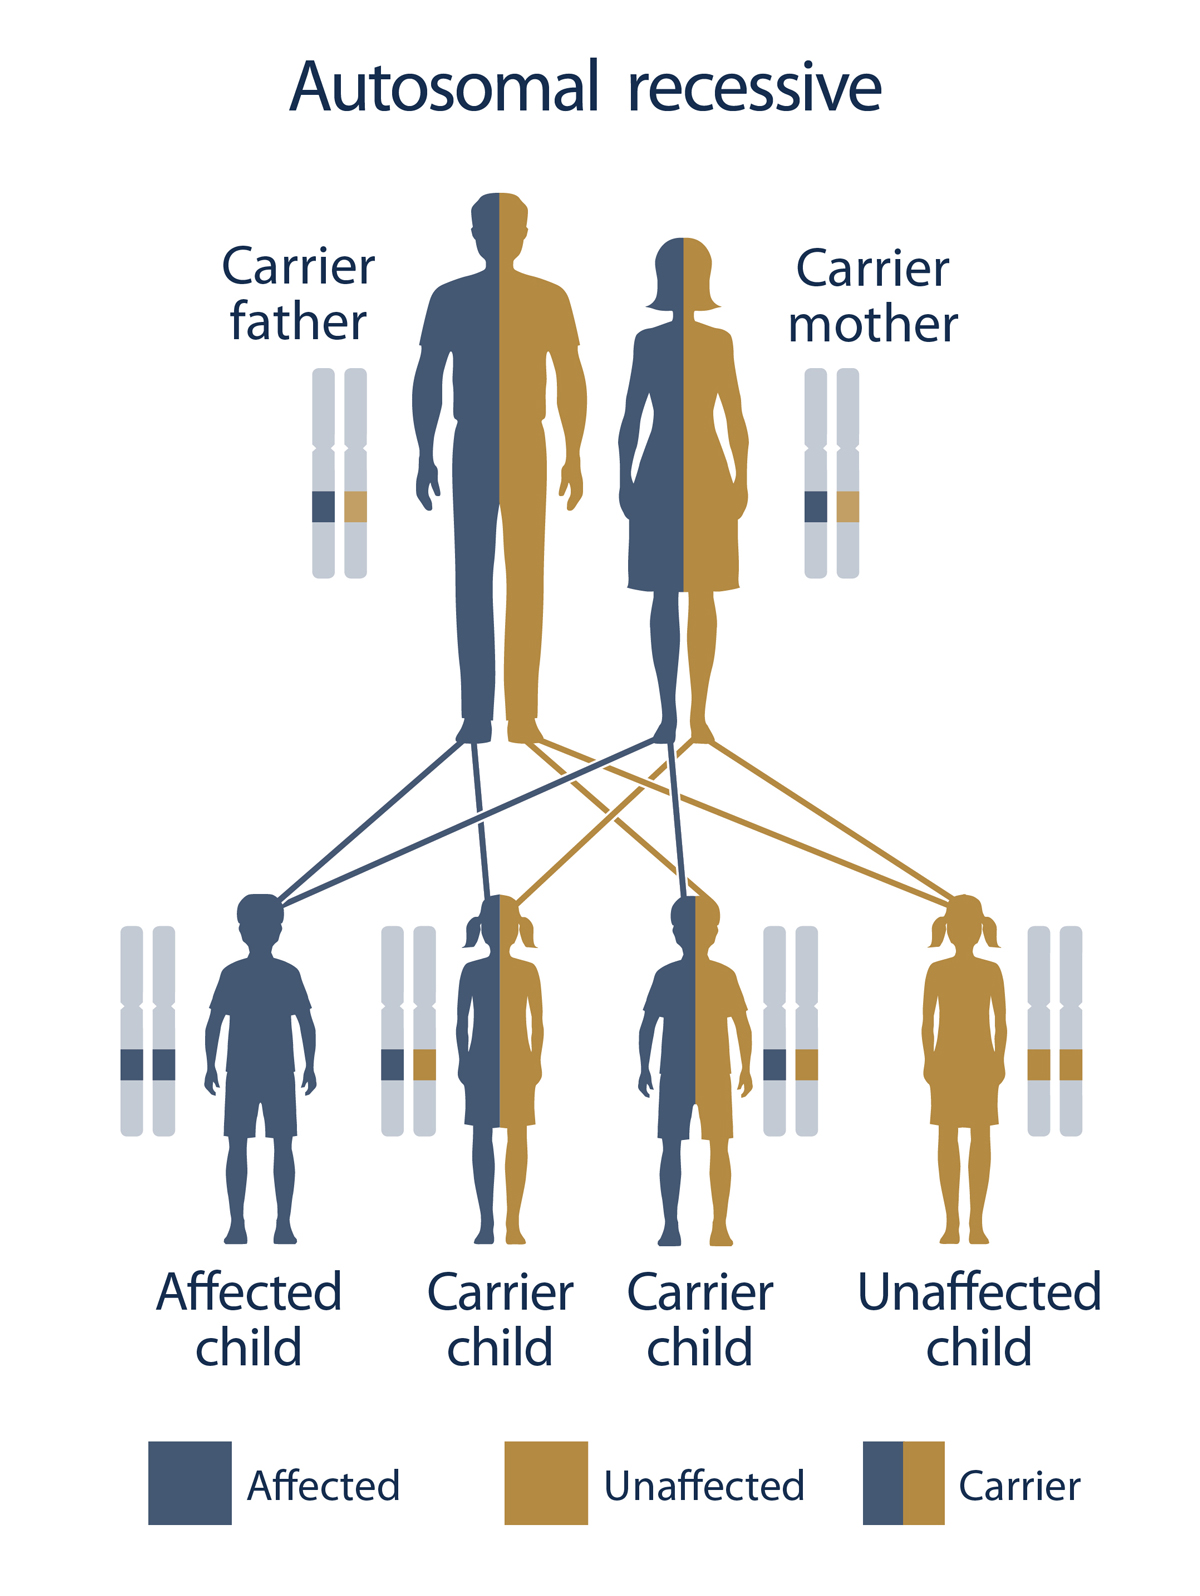 what is an example of an autosomal recessive genetic disorder